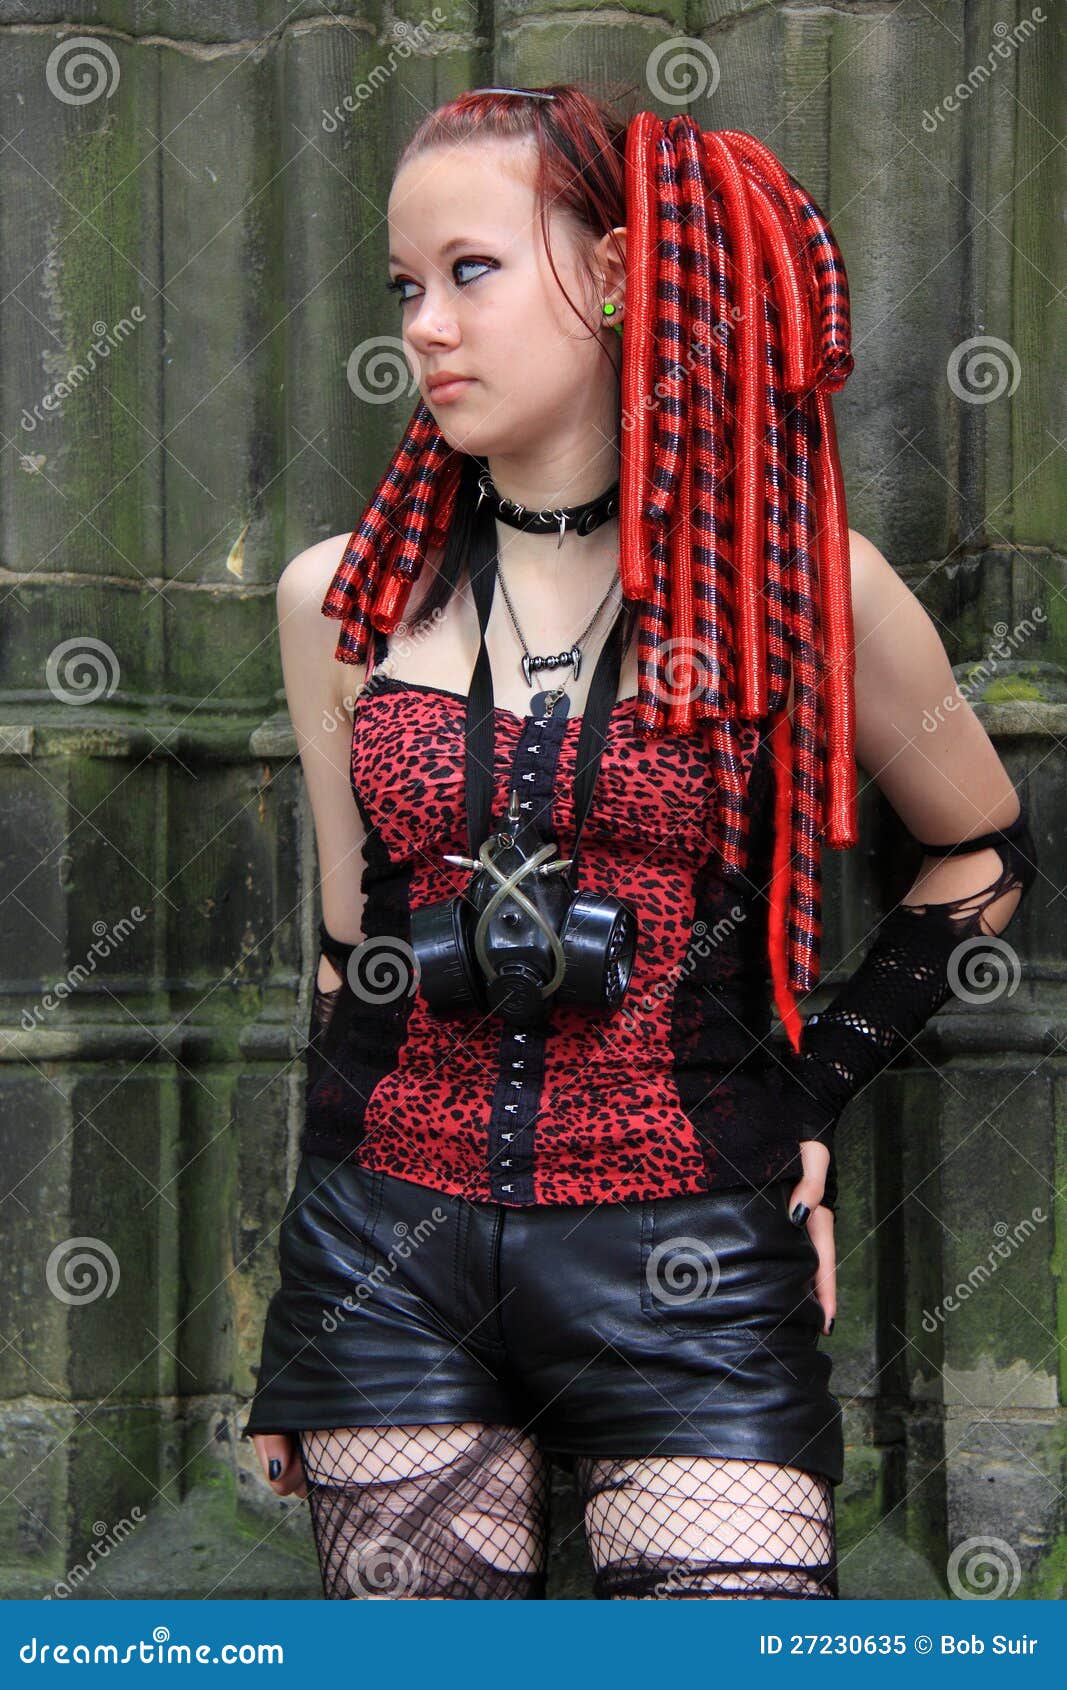 Gothic Cyber Girl Hair Extensions Editorial Image - Image 